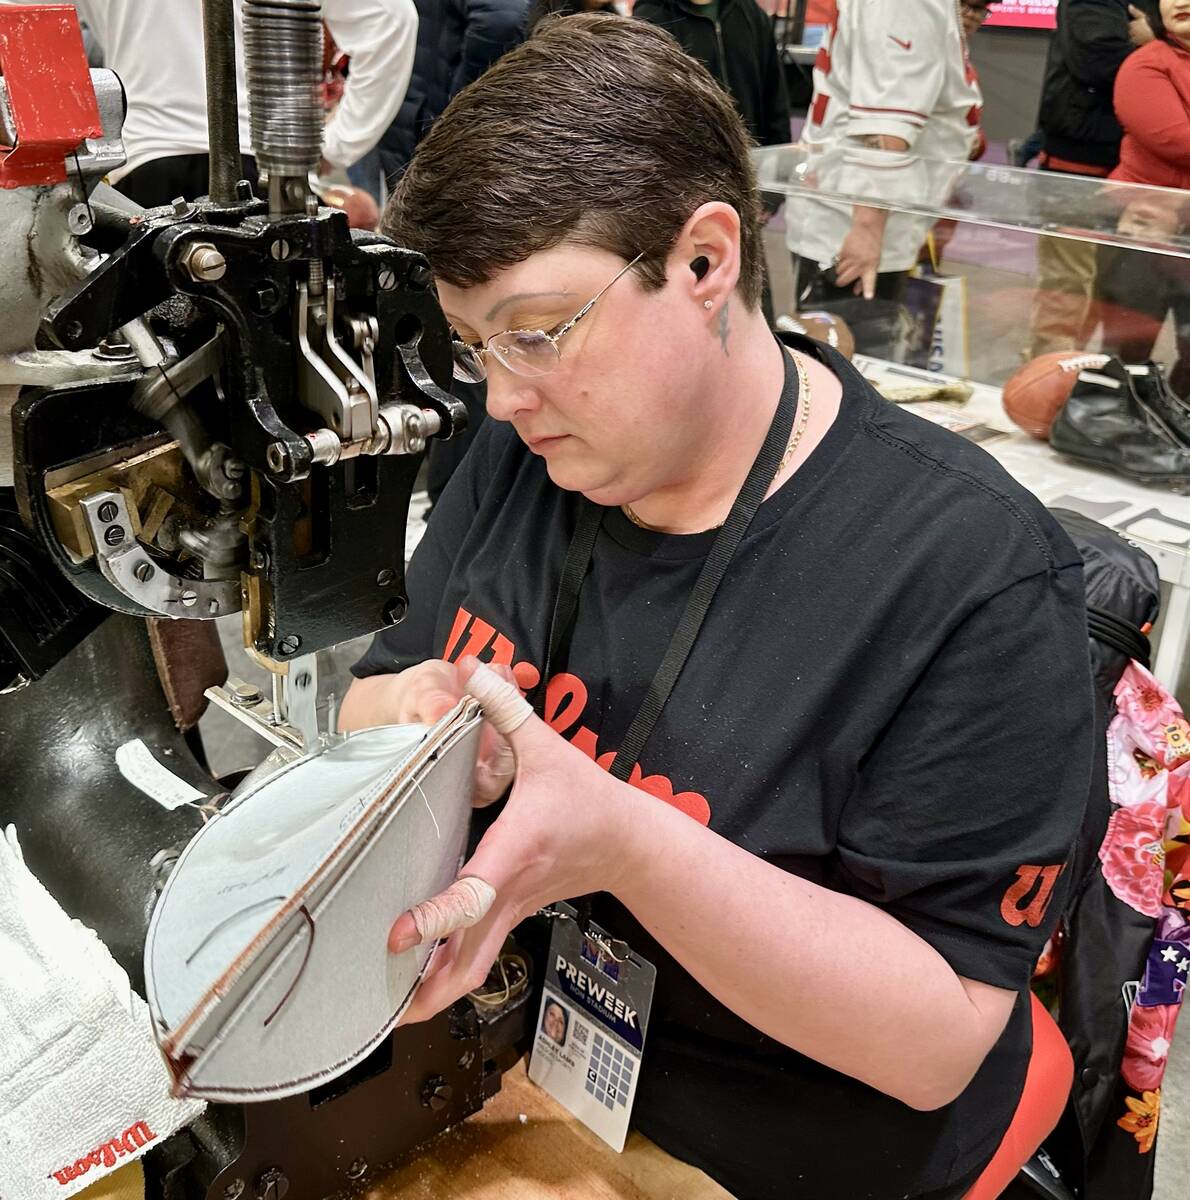 Ashley Lamb, 36, who works at the Wilson Football Factory in Ada, Ohio, demonstrates how she se ...